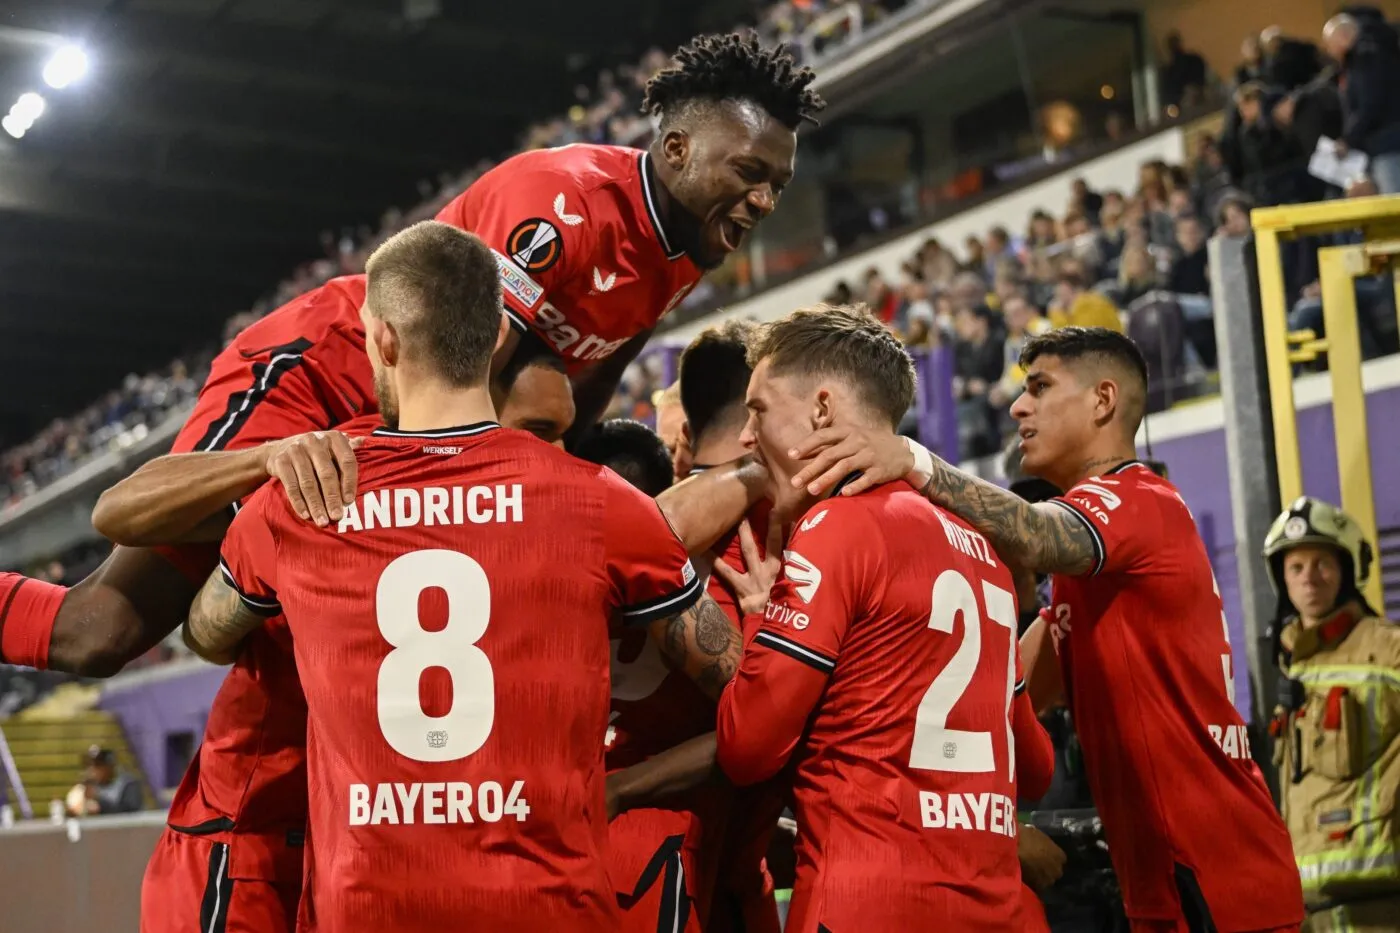 Leverkusen's Moussa Diaby celebrates with his teammates after scoring during a soccer match between Belgian Royale Union Saint-Gilloise and German Bayer 04 Leverkusen, Thursday 20 April 2023 in Anderlecht, Brussels, the return leg of the quarterfinals of the UEFA Europa League competition. The first leg ended in a 1-1 draw. BELGA PHOTO LAURIE DIEFFEMBACQ - Photo by Icon sport